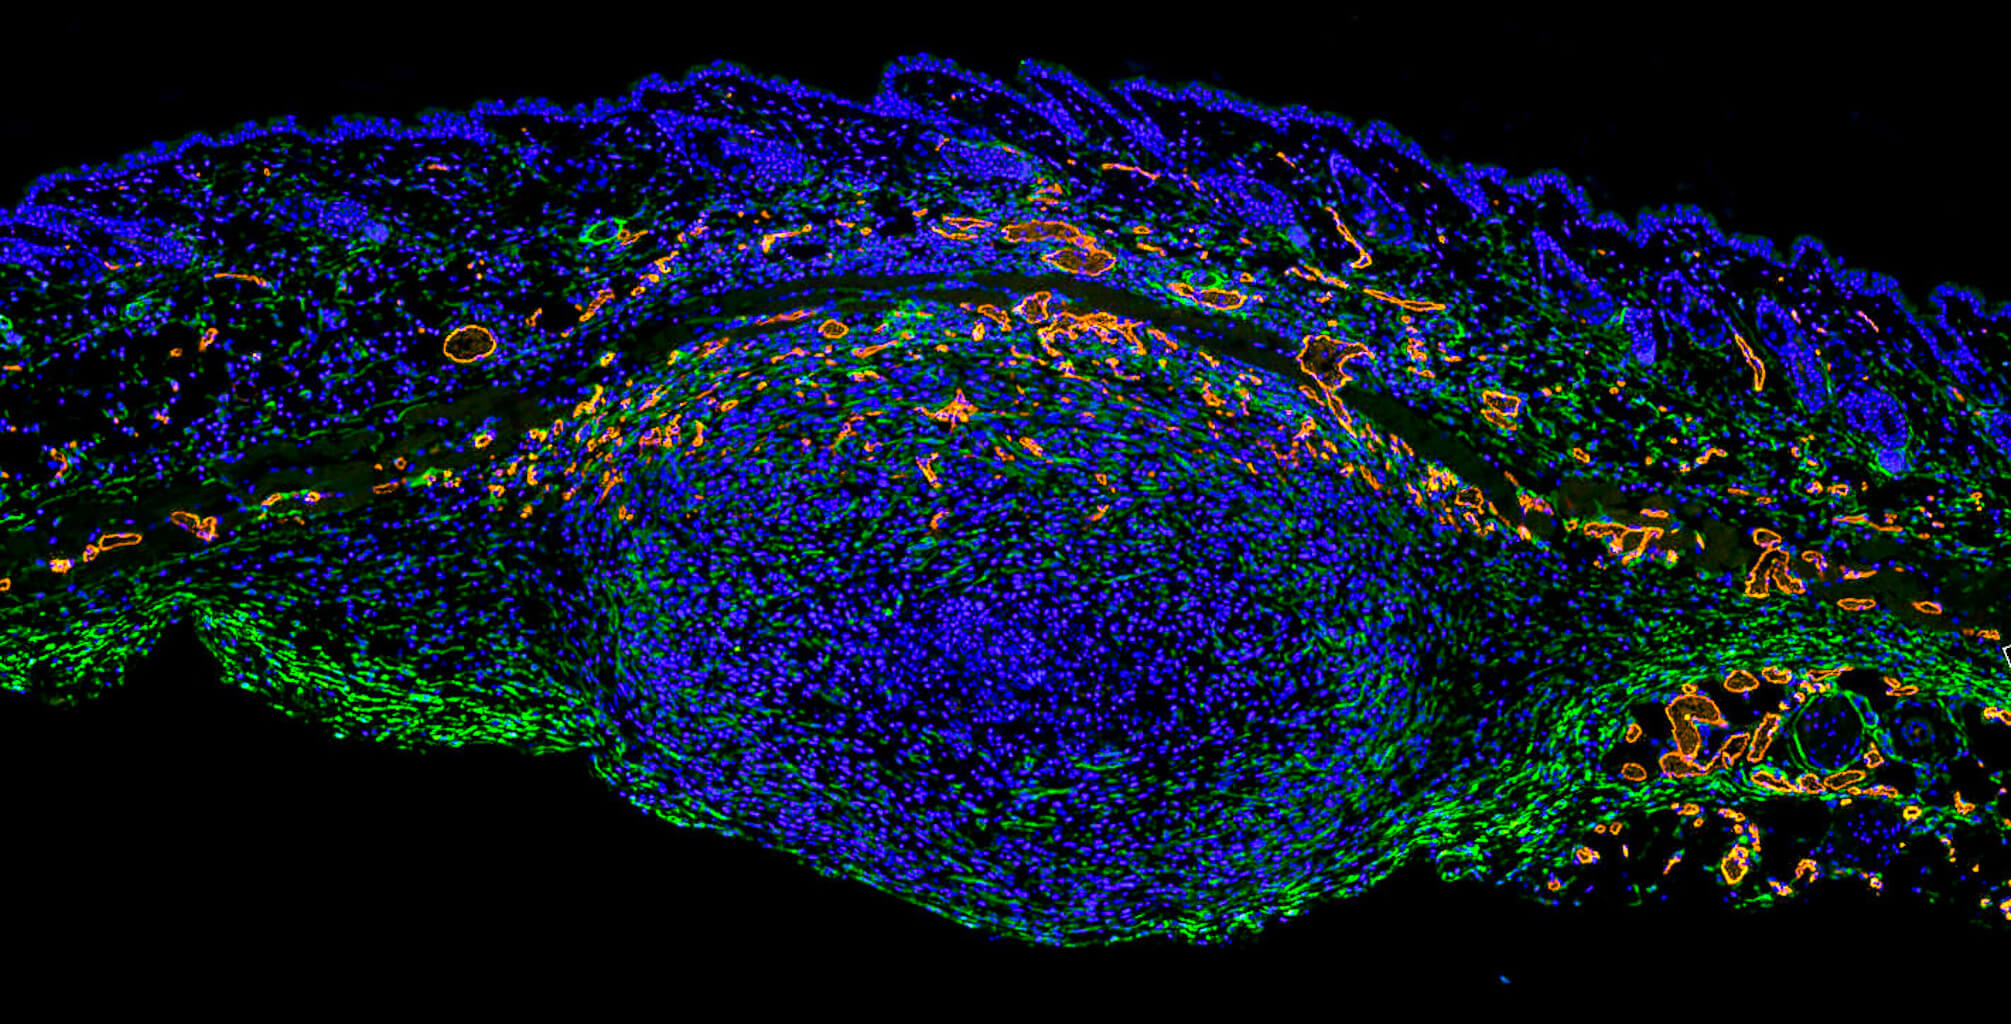 Keeping an eye on cancer – implanted breast cancer cells pushing upwards through layers of skin by Sarah Ash, PhD Student – Molecular Cell Biology Team, Division of Breast Cancer Research